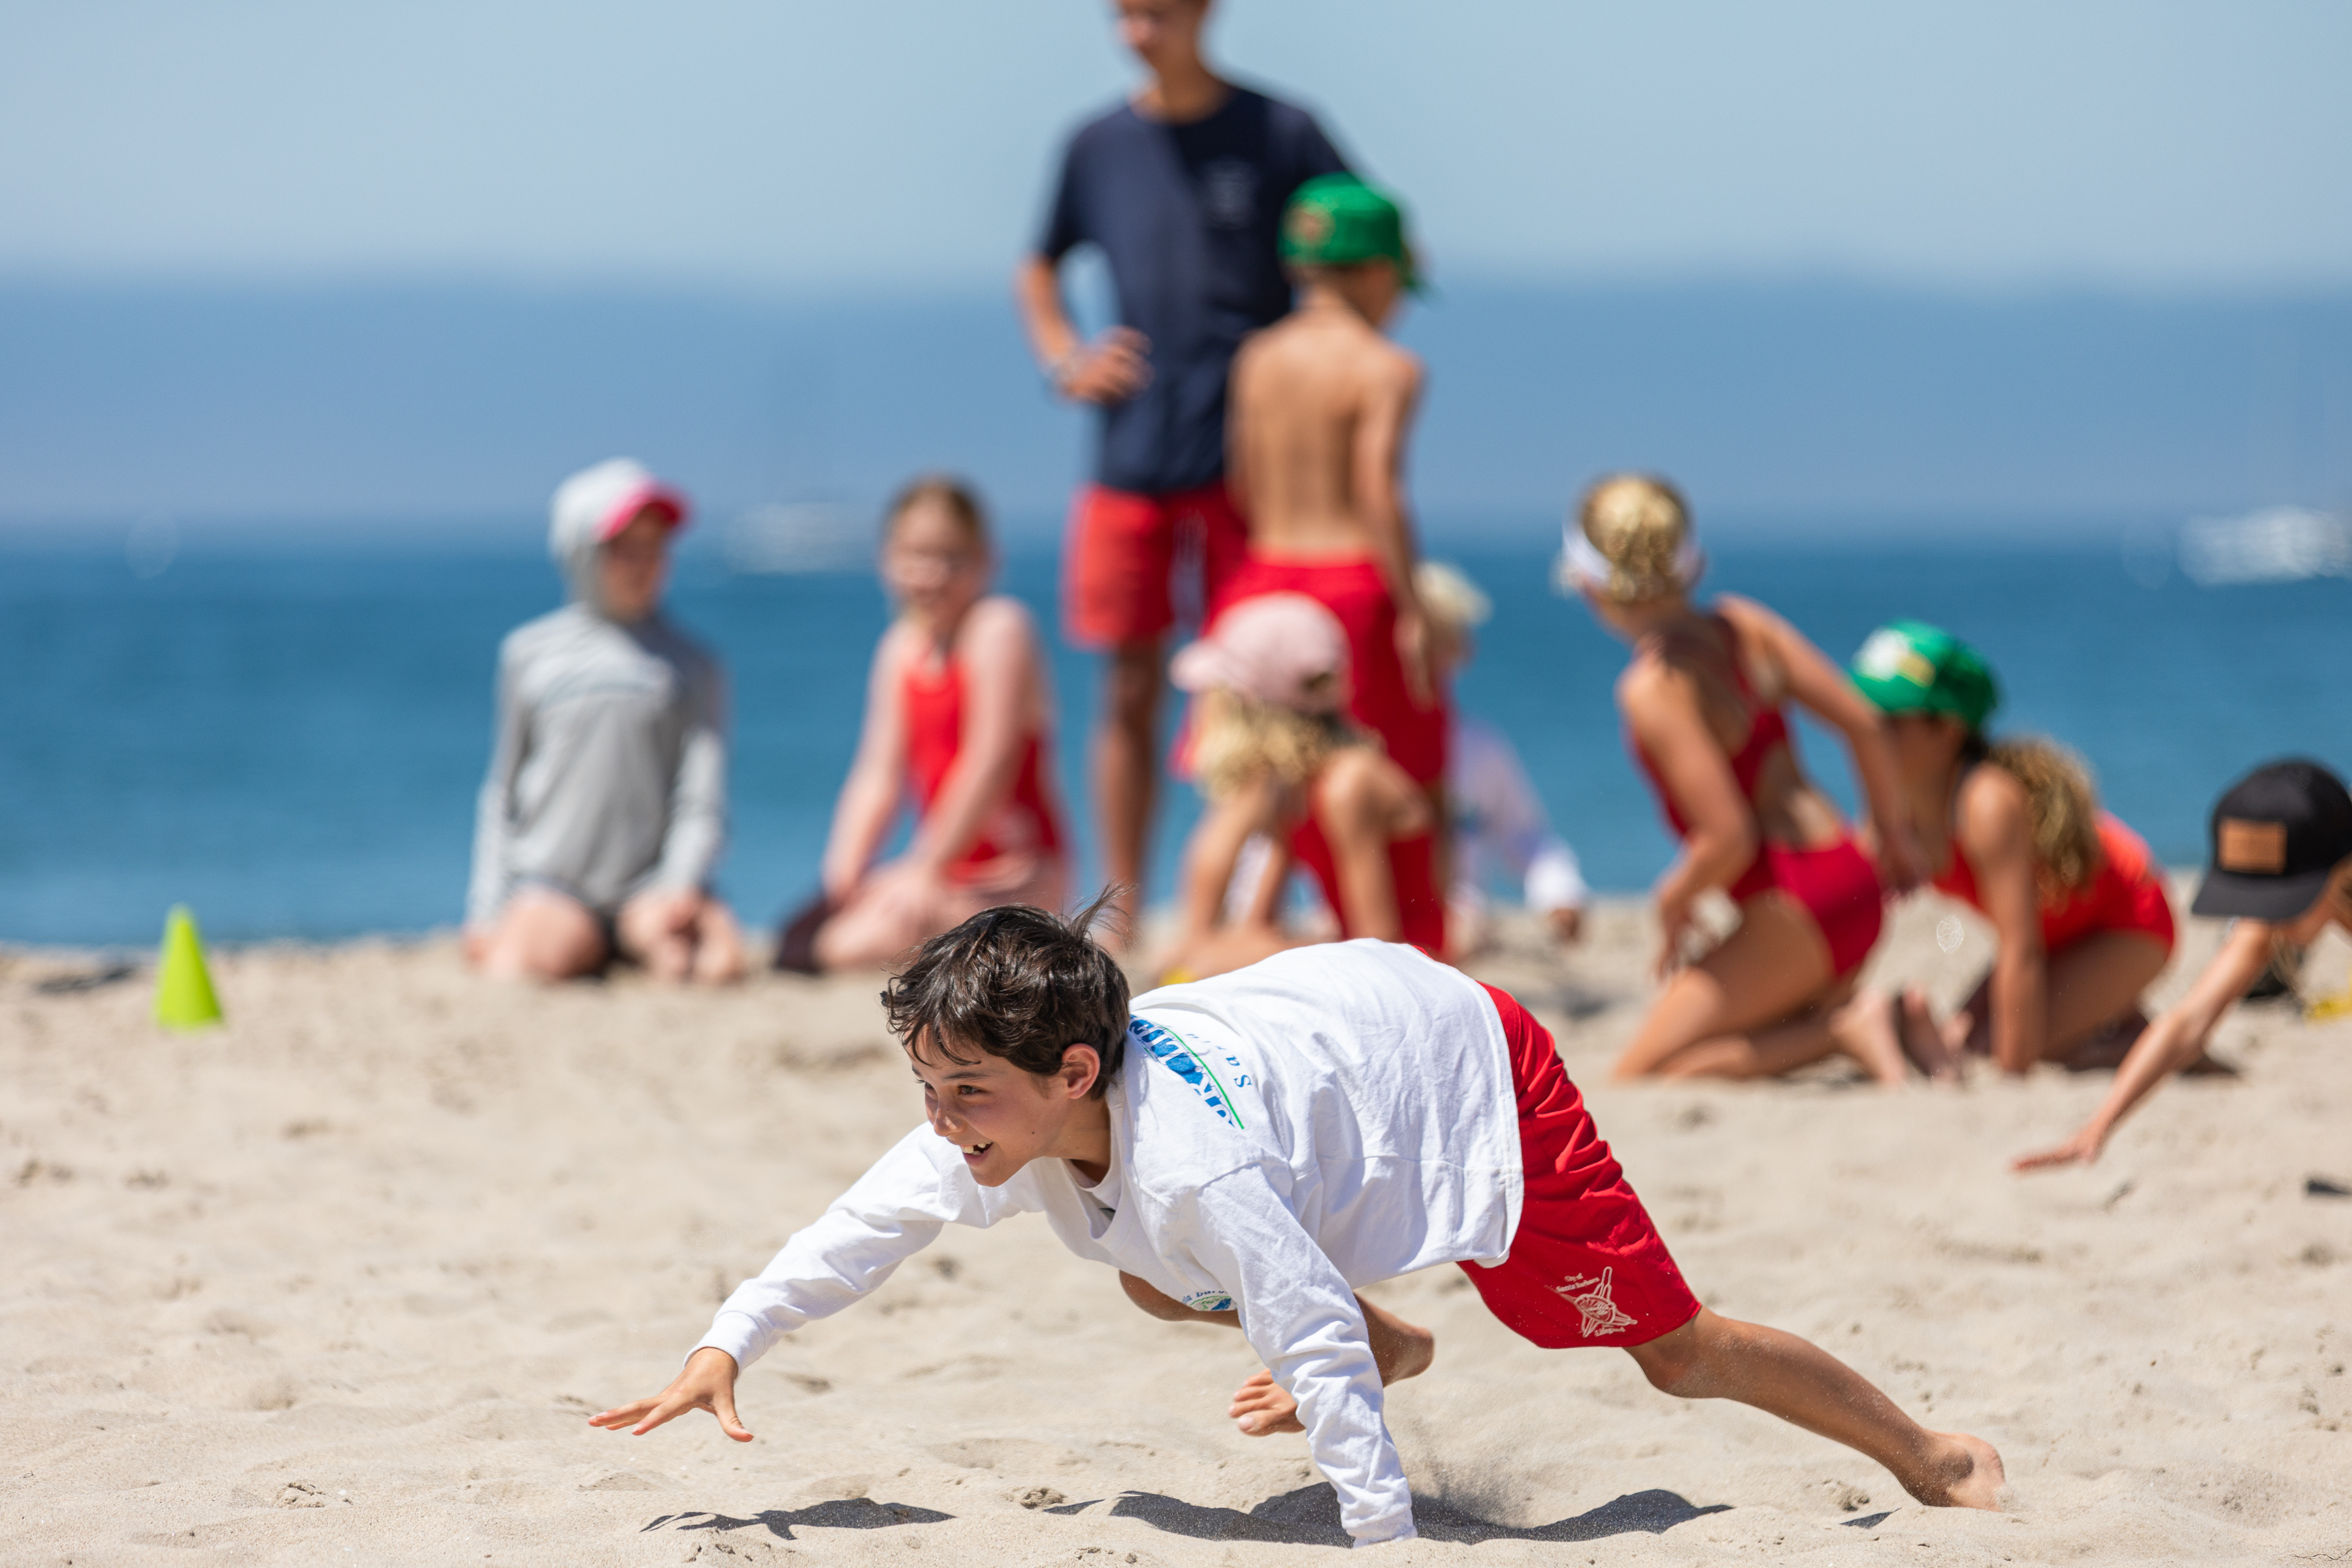 Junior Lifeguard bear crawls across the sand in a relay competition